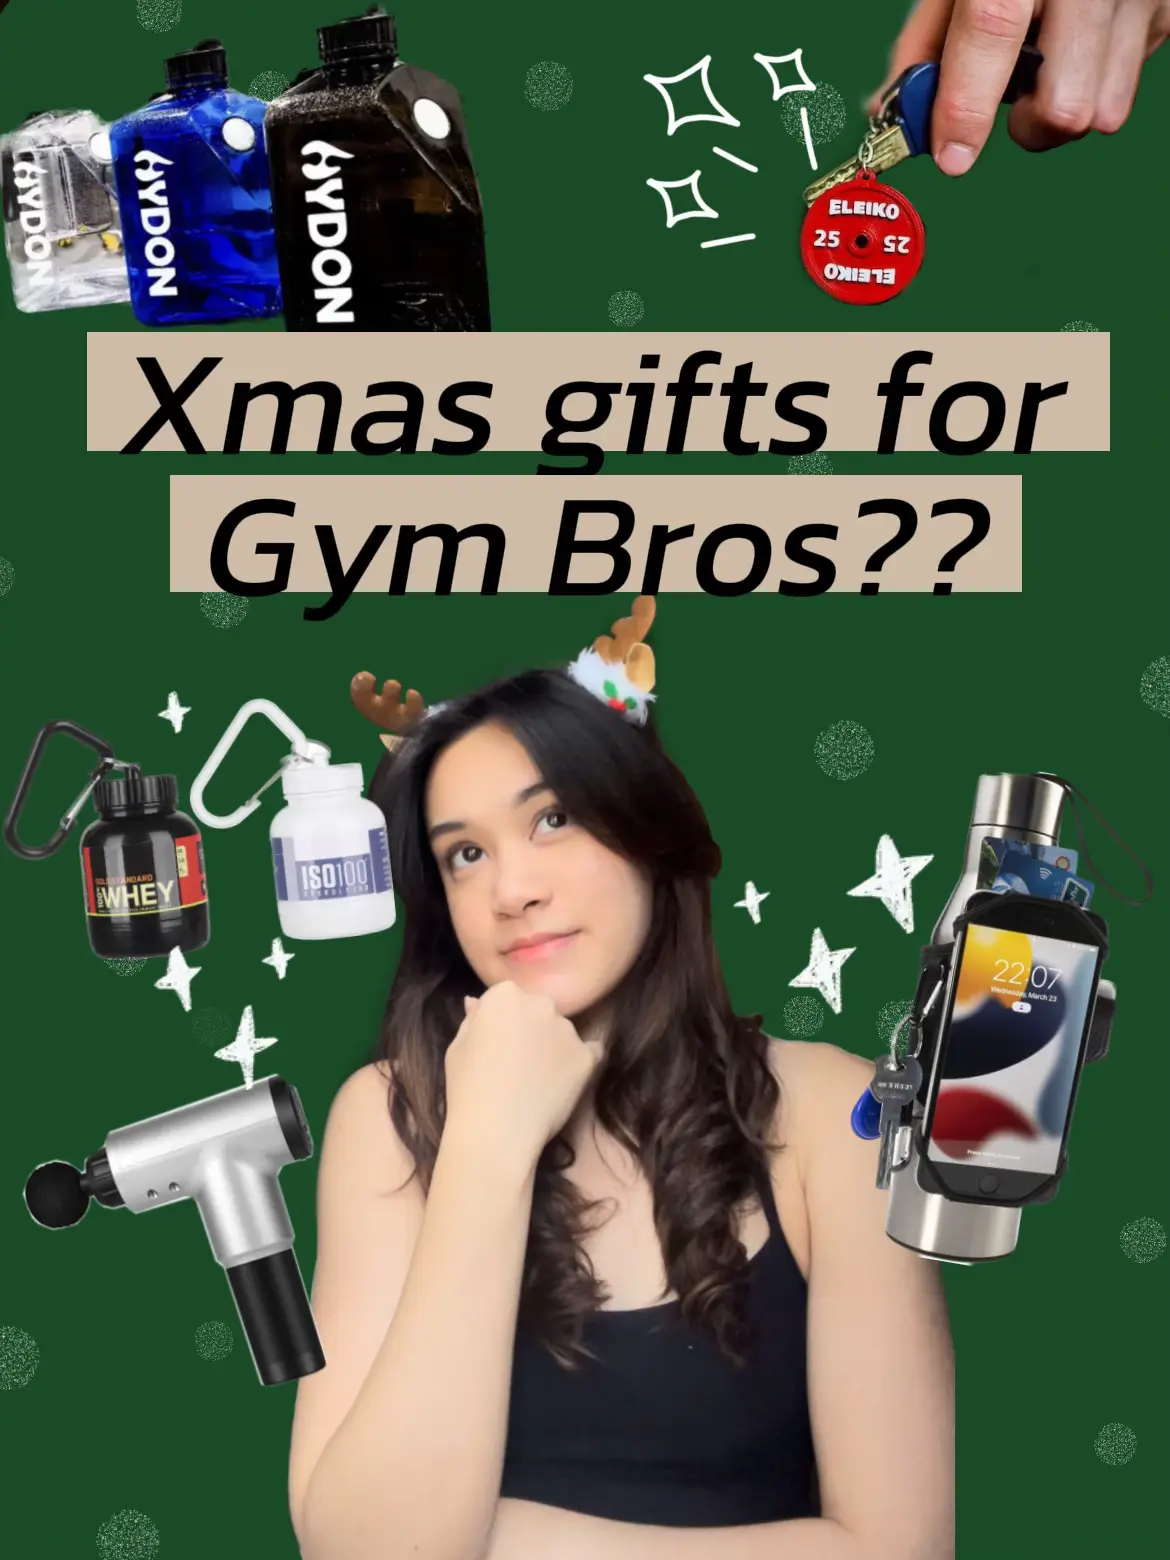 5 BUDGET FRIENDLY Xmas gifts for your GYM BRO! 🎄